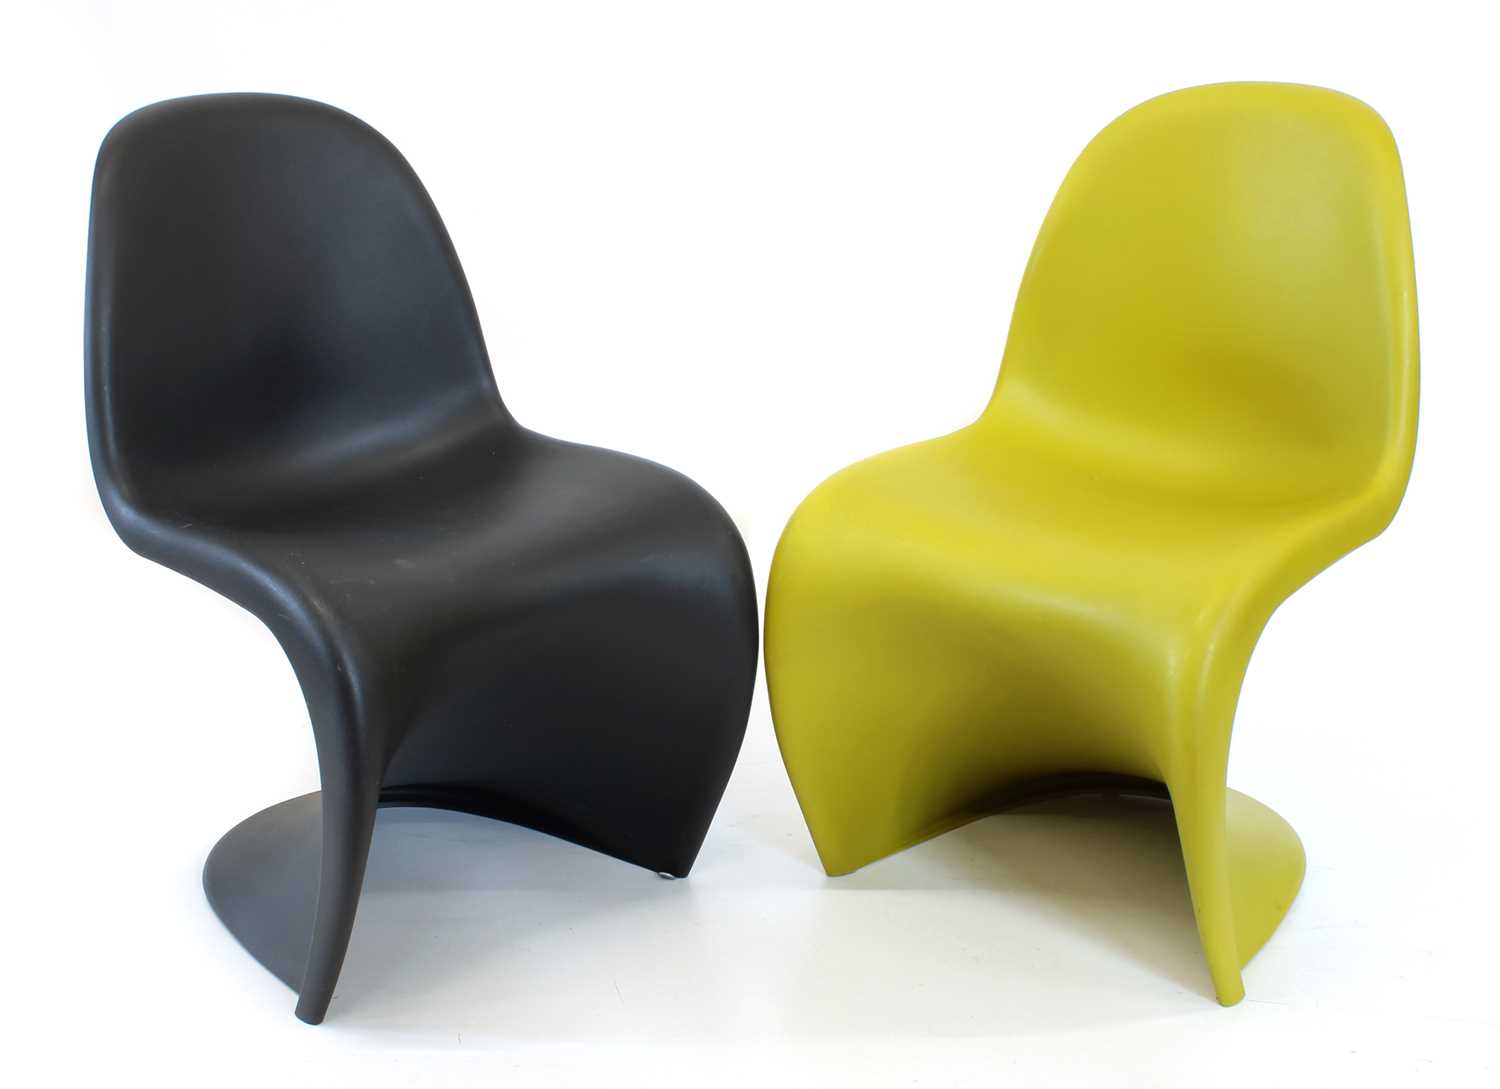 Verner Panton for Vitra Set of Four "Panton" Chairs - Image 2 of 16